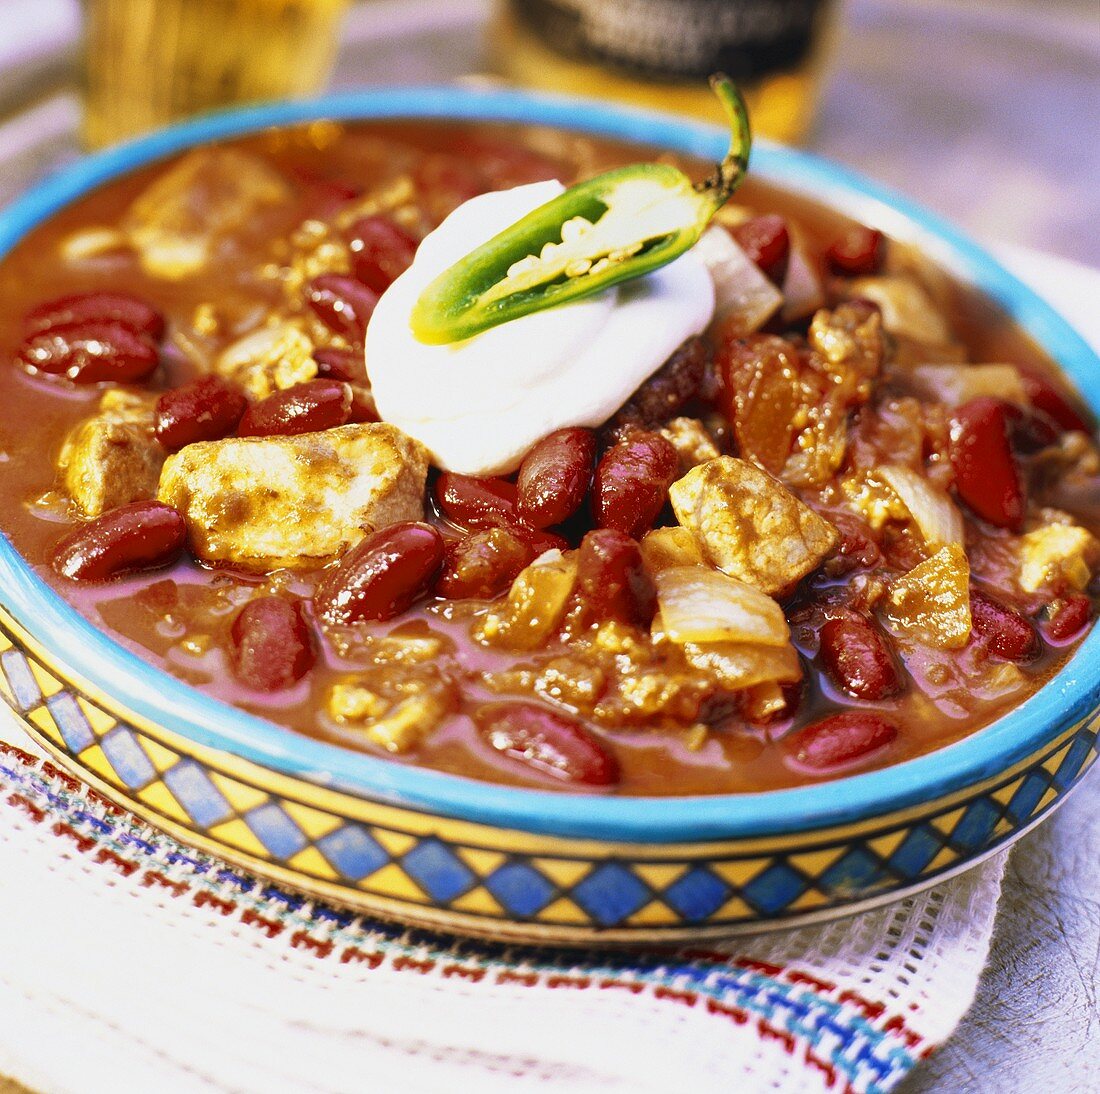 Chicken and red bean chili